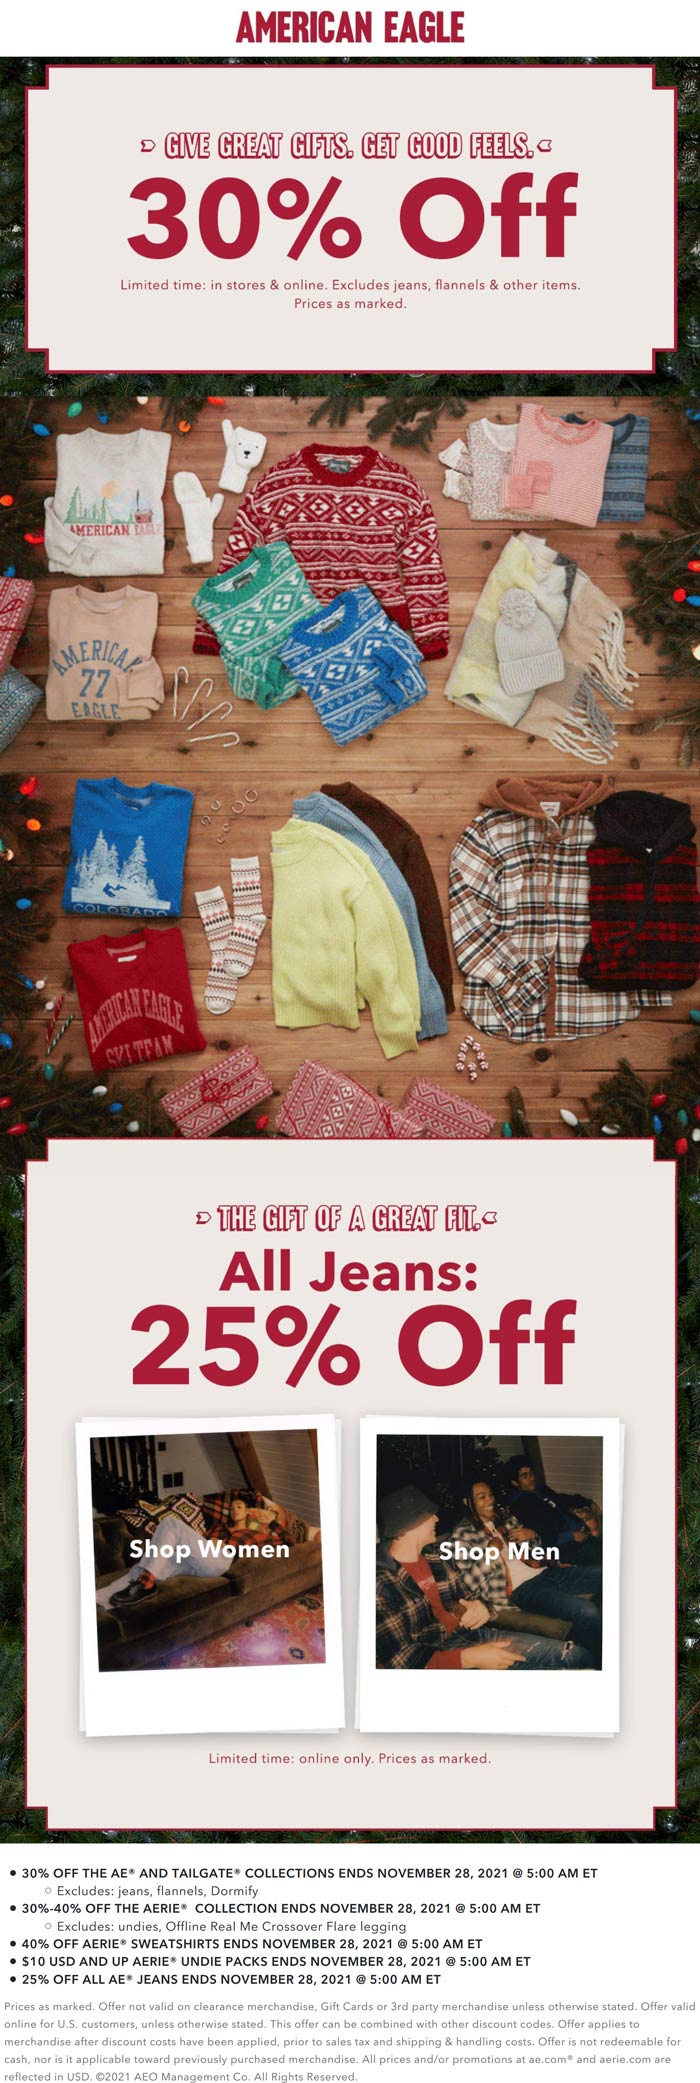 American Eagle stores Coupon  30% off at American Eagle, ditto online #americaneagle 